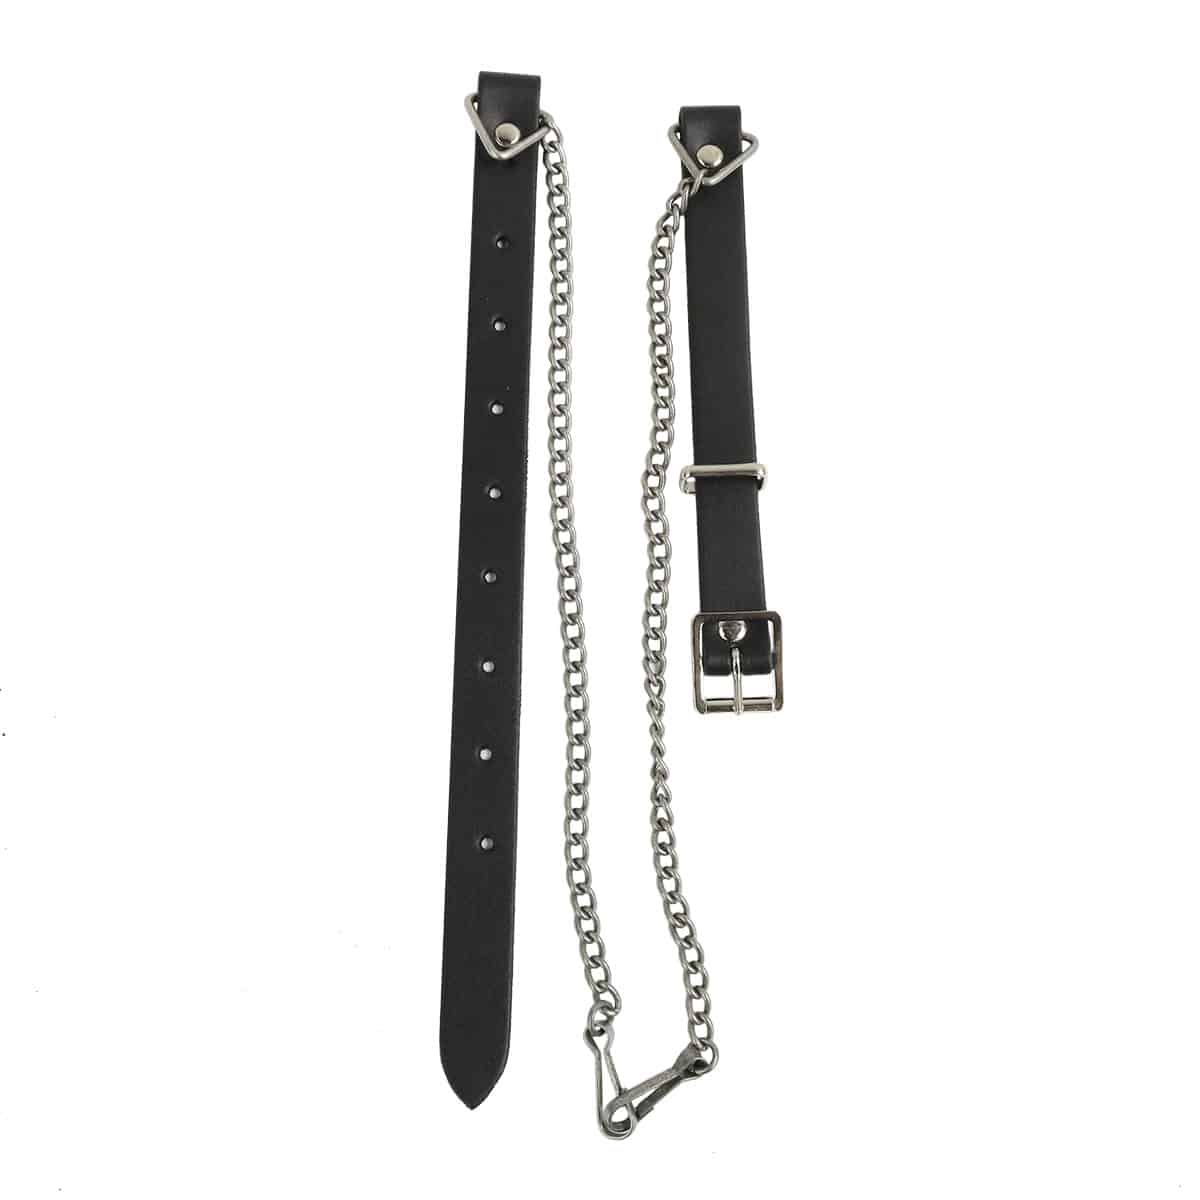 A Premium Black Leather Sporran Strap With Antiqued Chain with an antiqued chain attached to it.